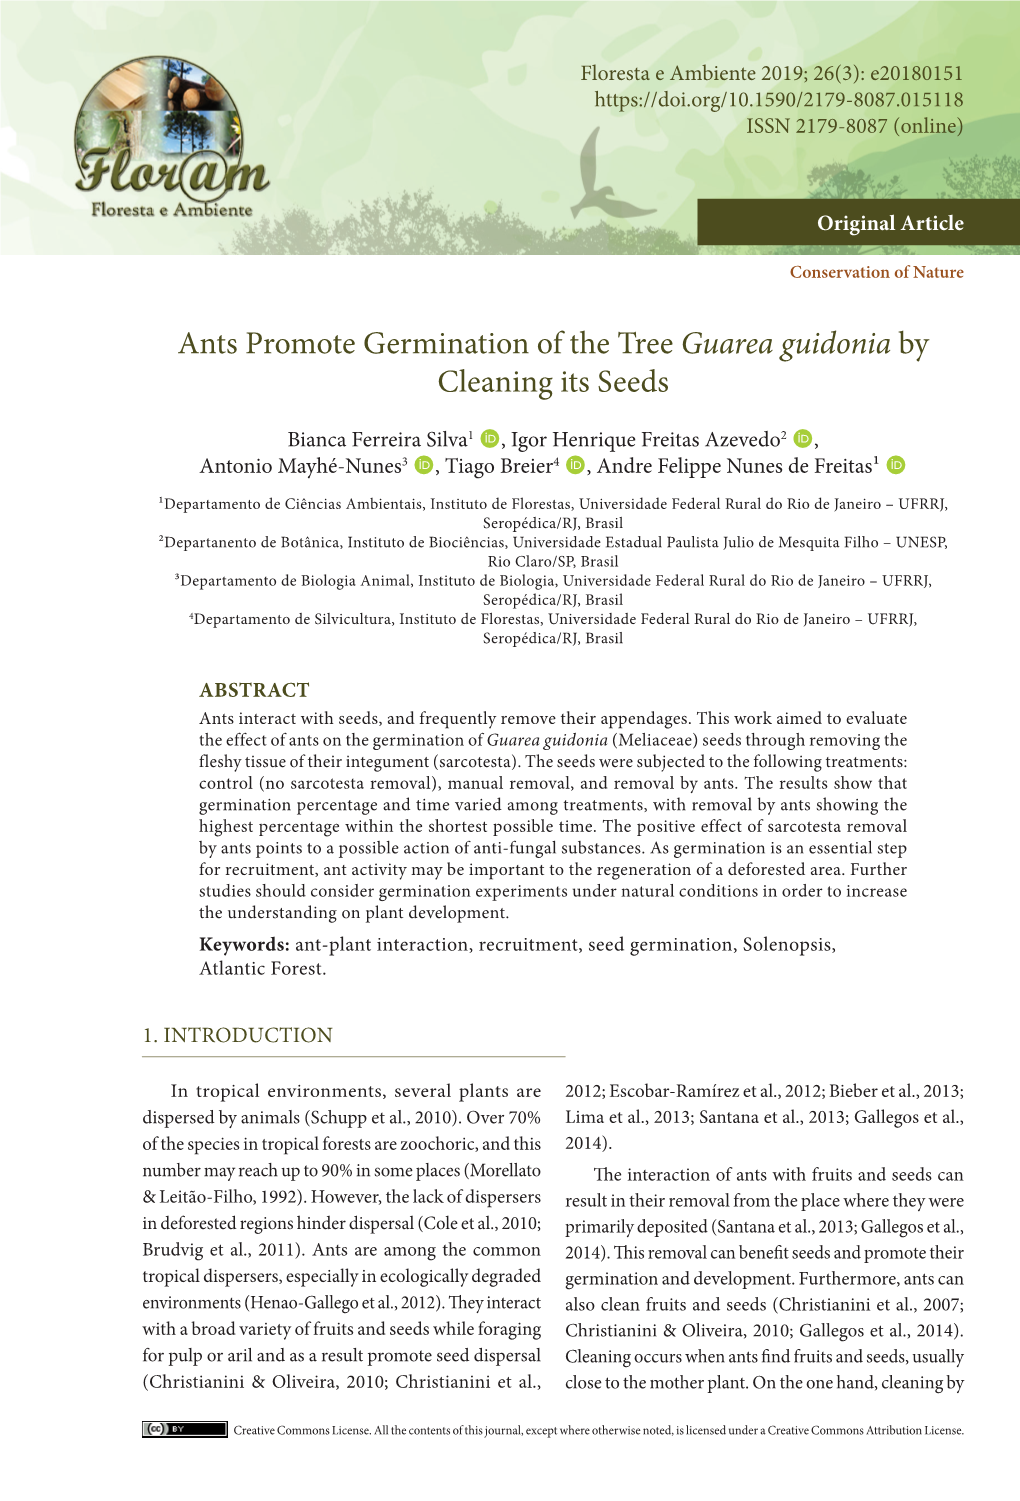 Ants Promote Germination of the Tree Guarea Guidonia by Cleaning Its Seeds